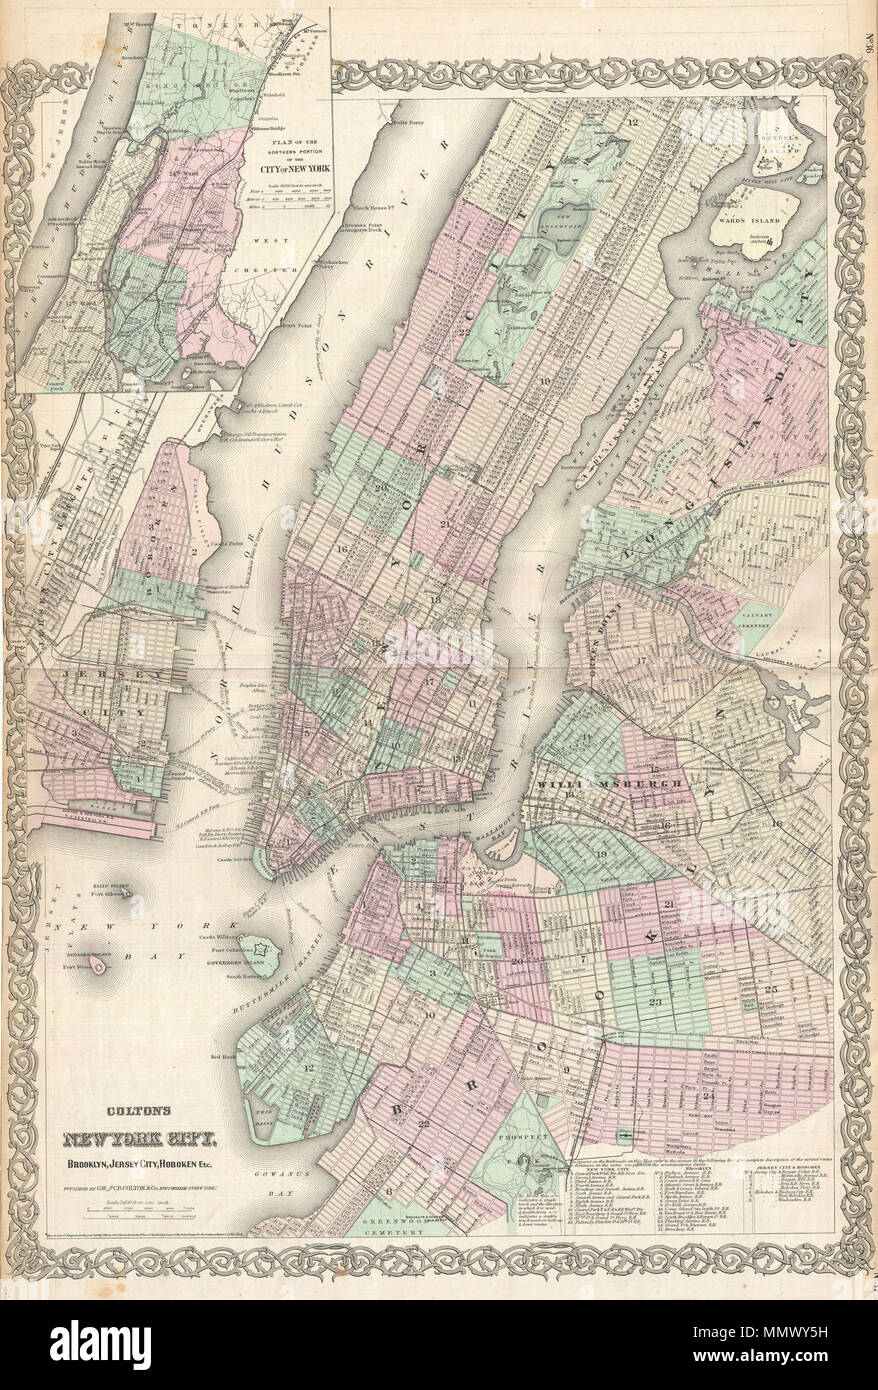 .  English: An extremely rare example of G. Woolworth Colton's 1866 vertical map of New York. This important map, based on a pocket map of the same area issued in 1865, marks a significant rethinking of the standard Manhattan map. Previous maps of New York City tended to represent only the lower parts of Manhattan (on the Burr model) or orient the city horizontally with the top of the map facing west (as in the Commissioner's Plan). With the opening of Central Park in the mid 1860s, the previously rural northern portions of the city became not only accessible, but desirable destinations. Map p Stock Photo